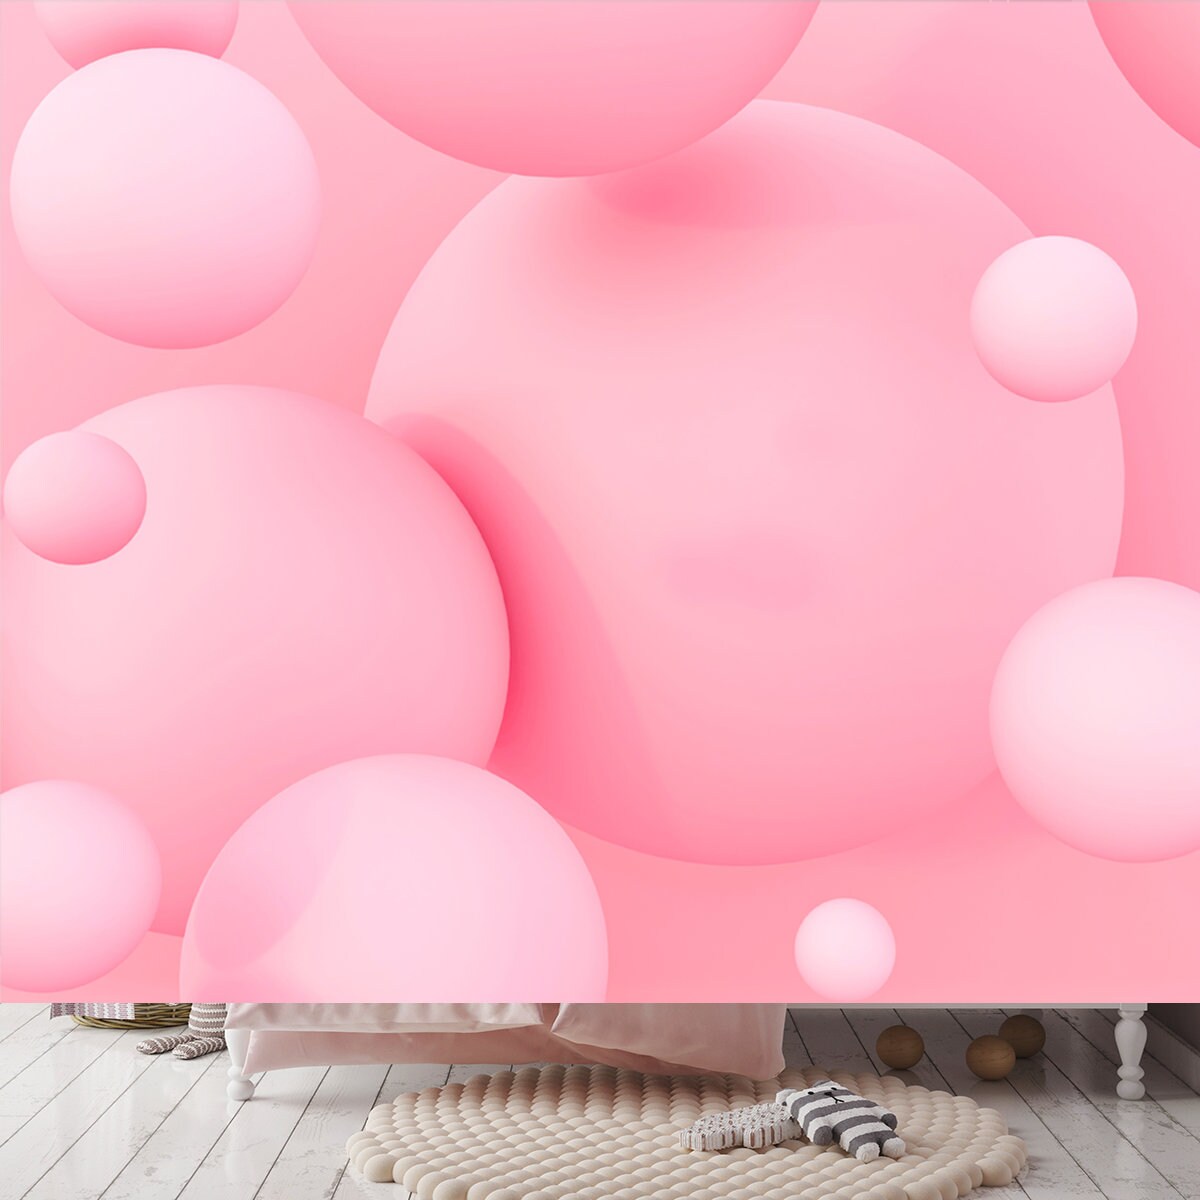 Abstract Colorful Balls. Pink Candies Fly in Zero Gravity. Chaotic Scatter Confetti Spheres Wallpaper Girl Bedroom Mural